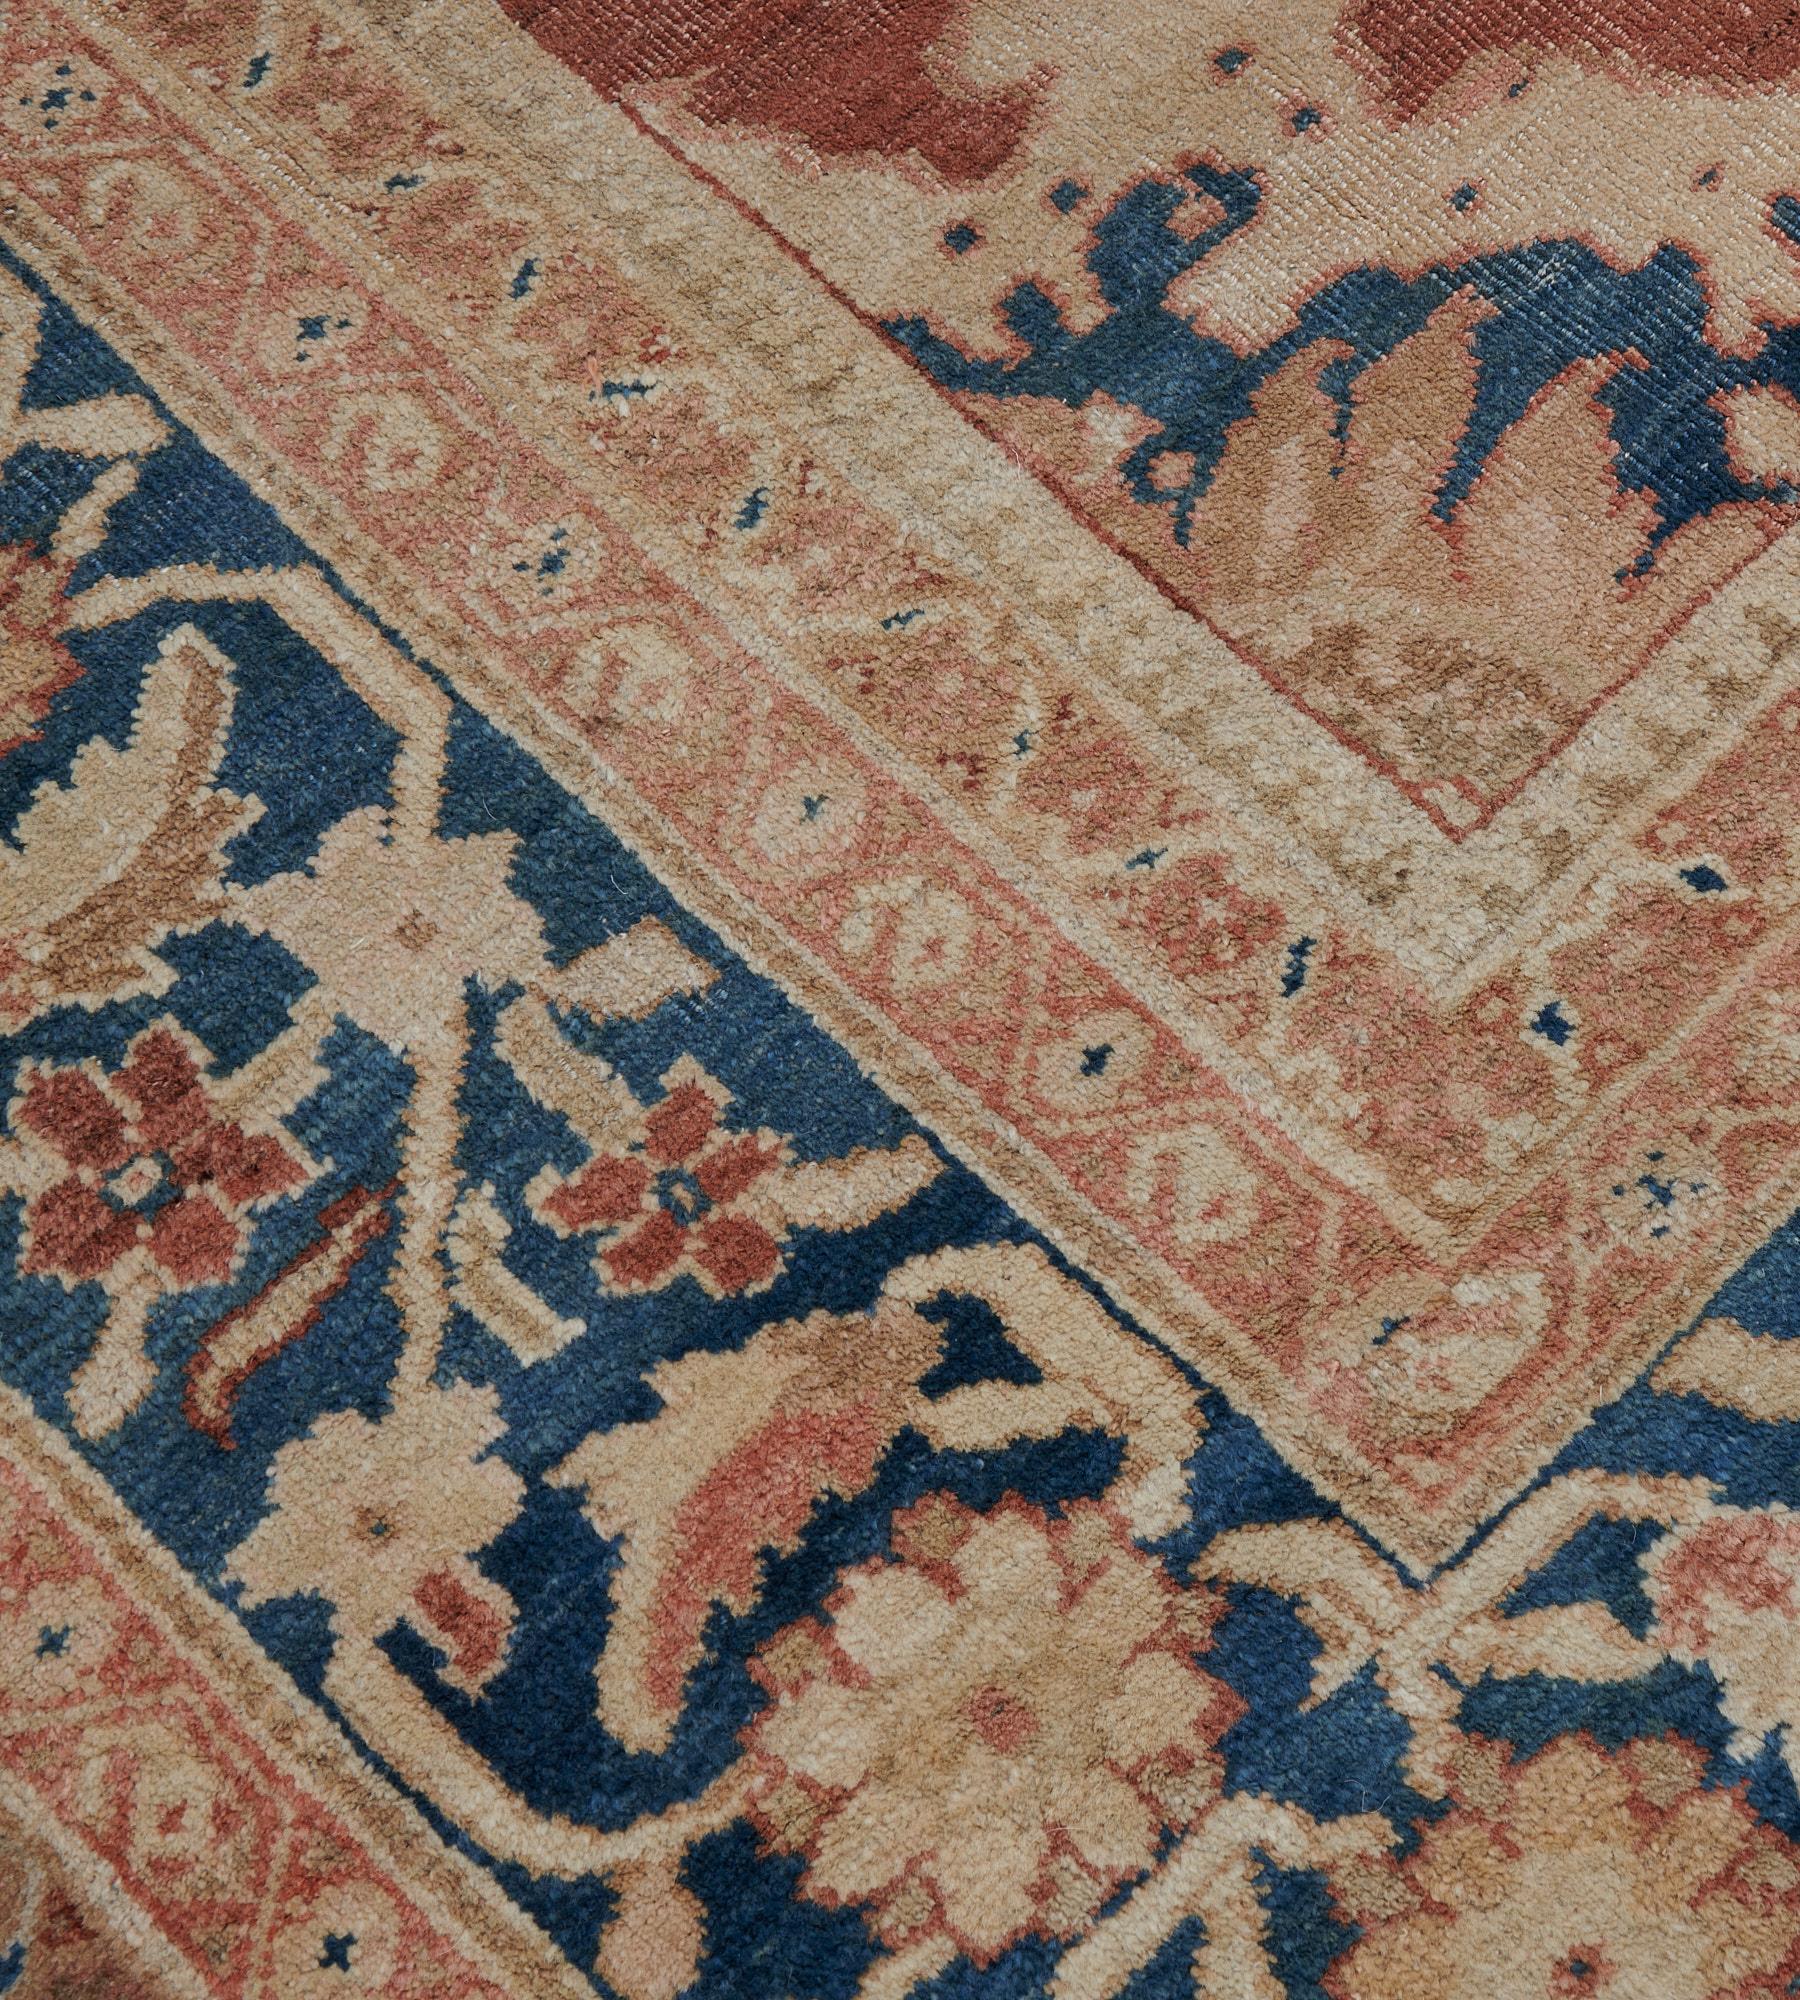 Hand-woven Antique Wool Floral Sultanabad Rug In Good Condition For Sale In West Hollywood, CA